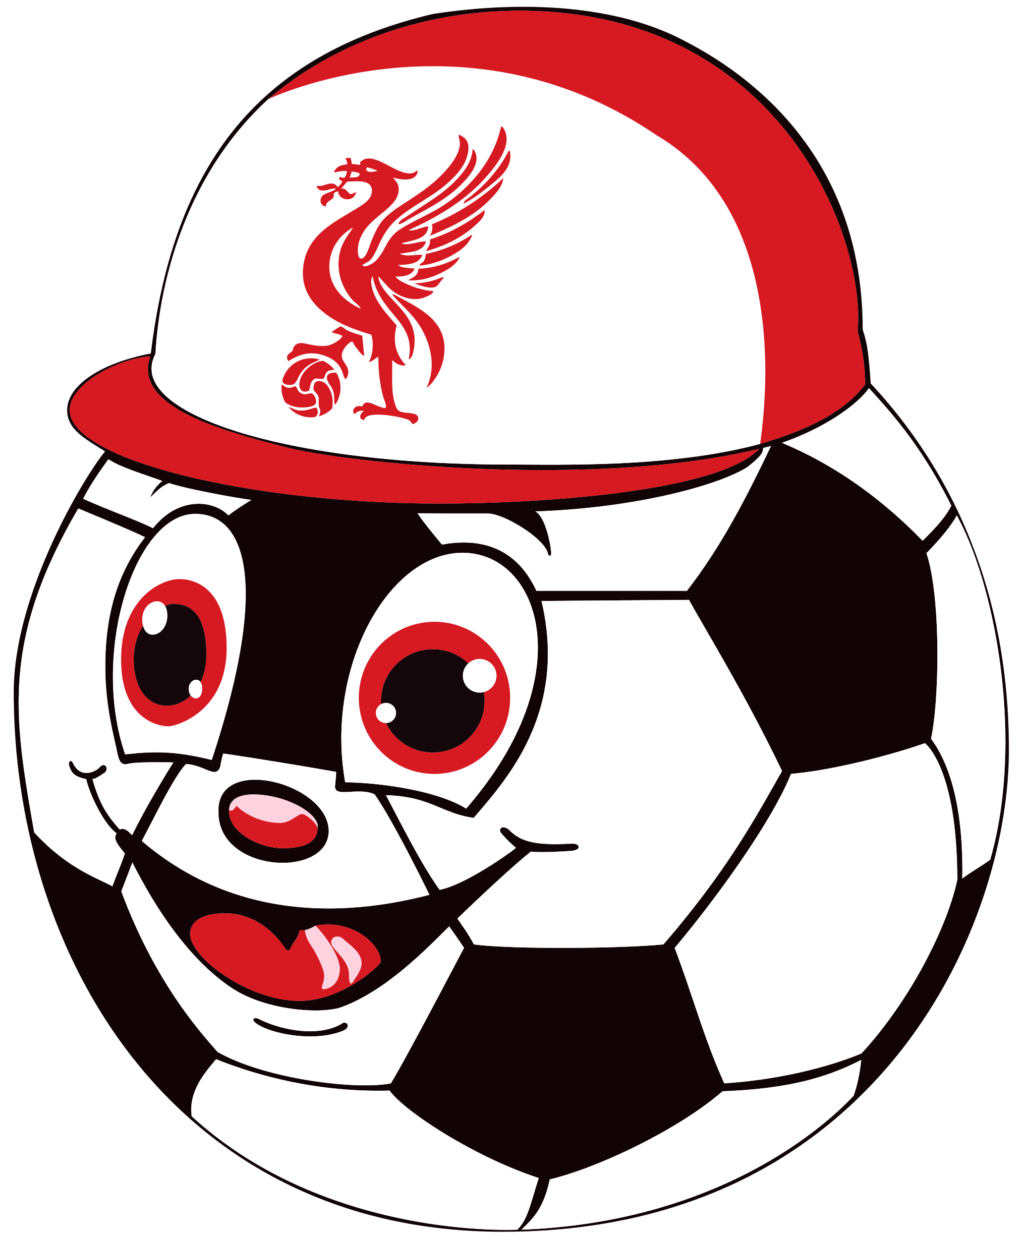 liverpool fc 04 European Football (England Premier League) Liverpool FC SVG, SVG Files For Silhouette, Liverpool FC Files For Cricut, Liverpool FC SVG, DXF, EPS, PNG Instant Download. Liverpool FC SVG, SVG Files For Silhouette, Liverpool FC Files For Cricut, Liverpool FC SVG, DXF, EPS, PNG Instant Download.